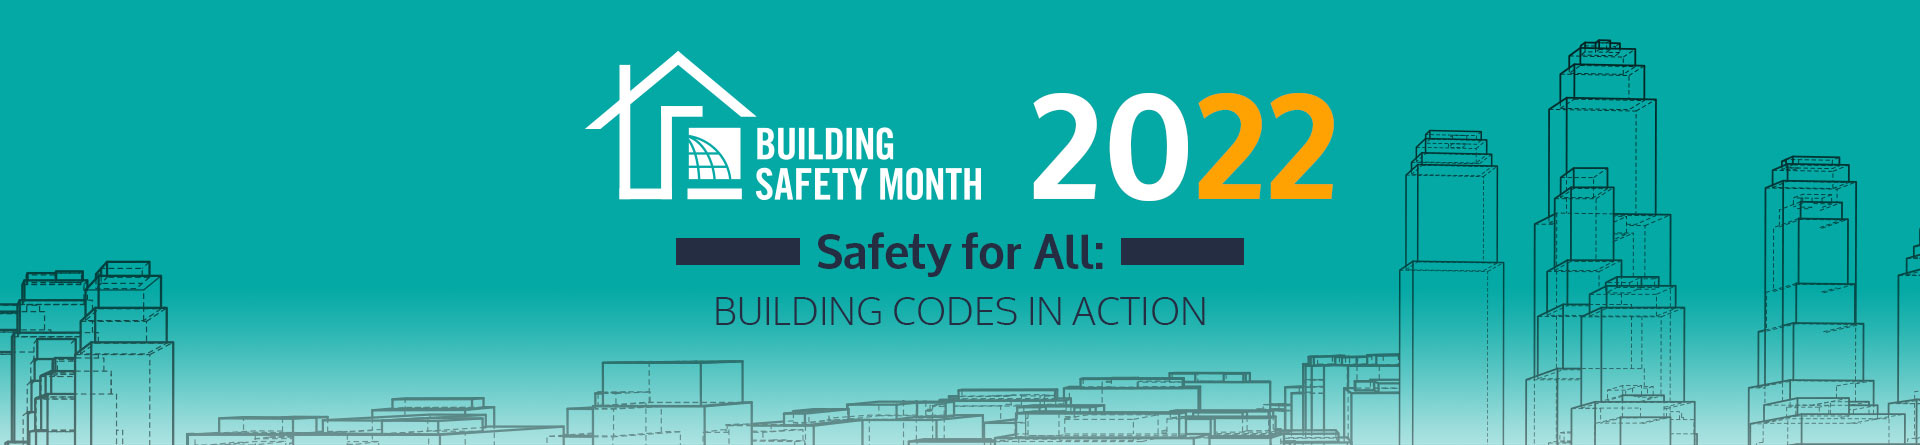 2022 Building Safety Month